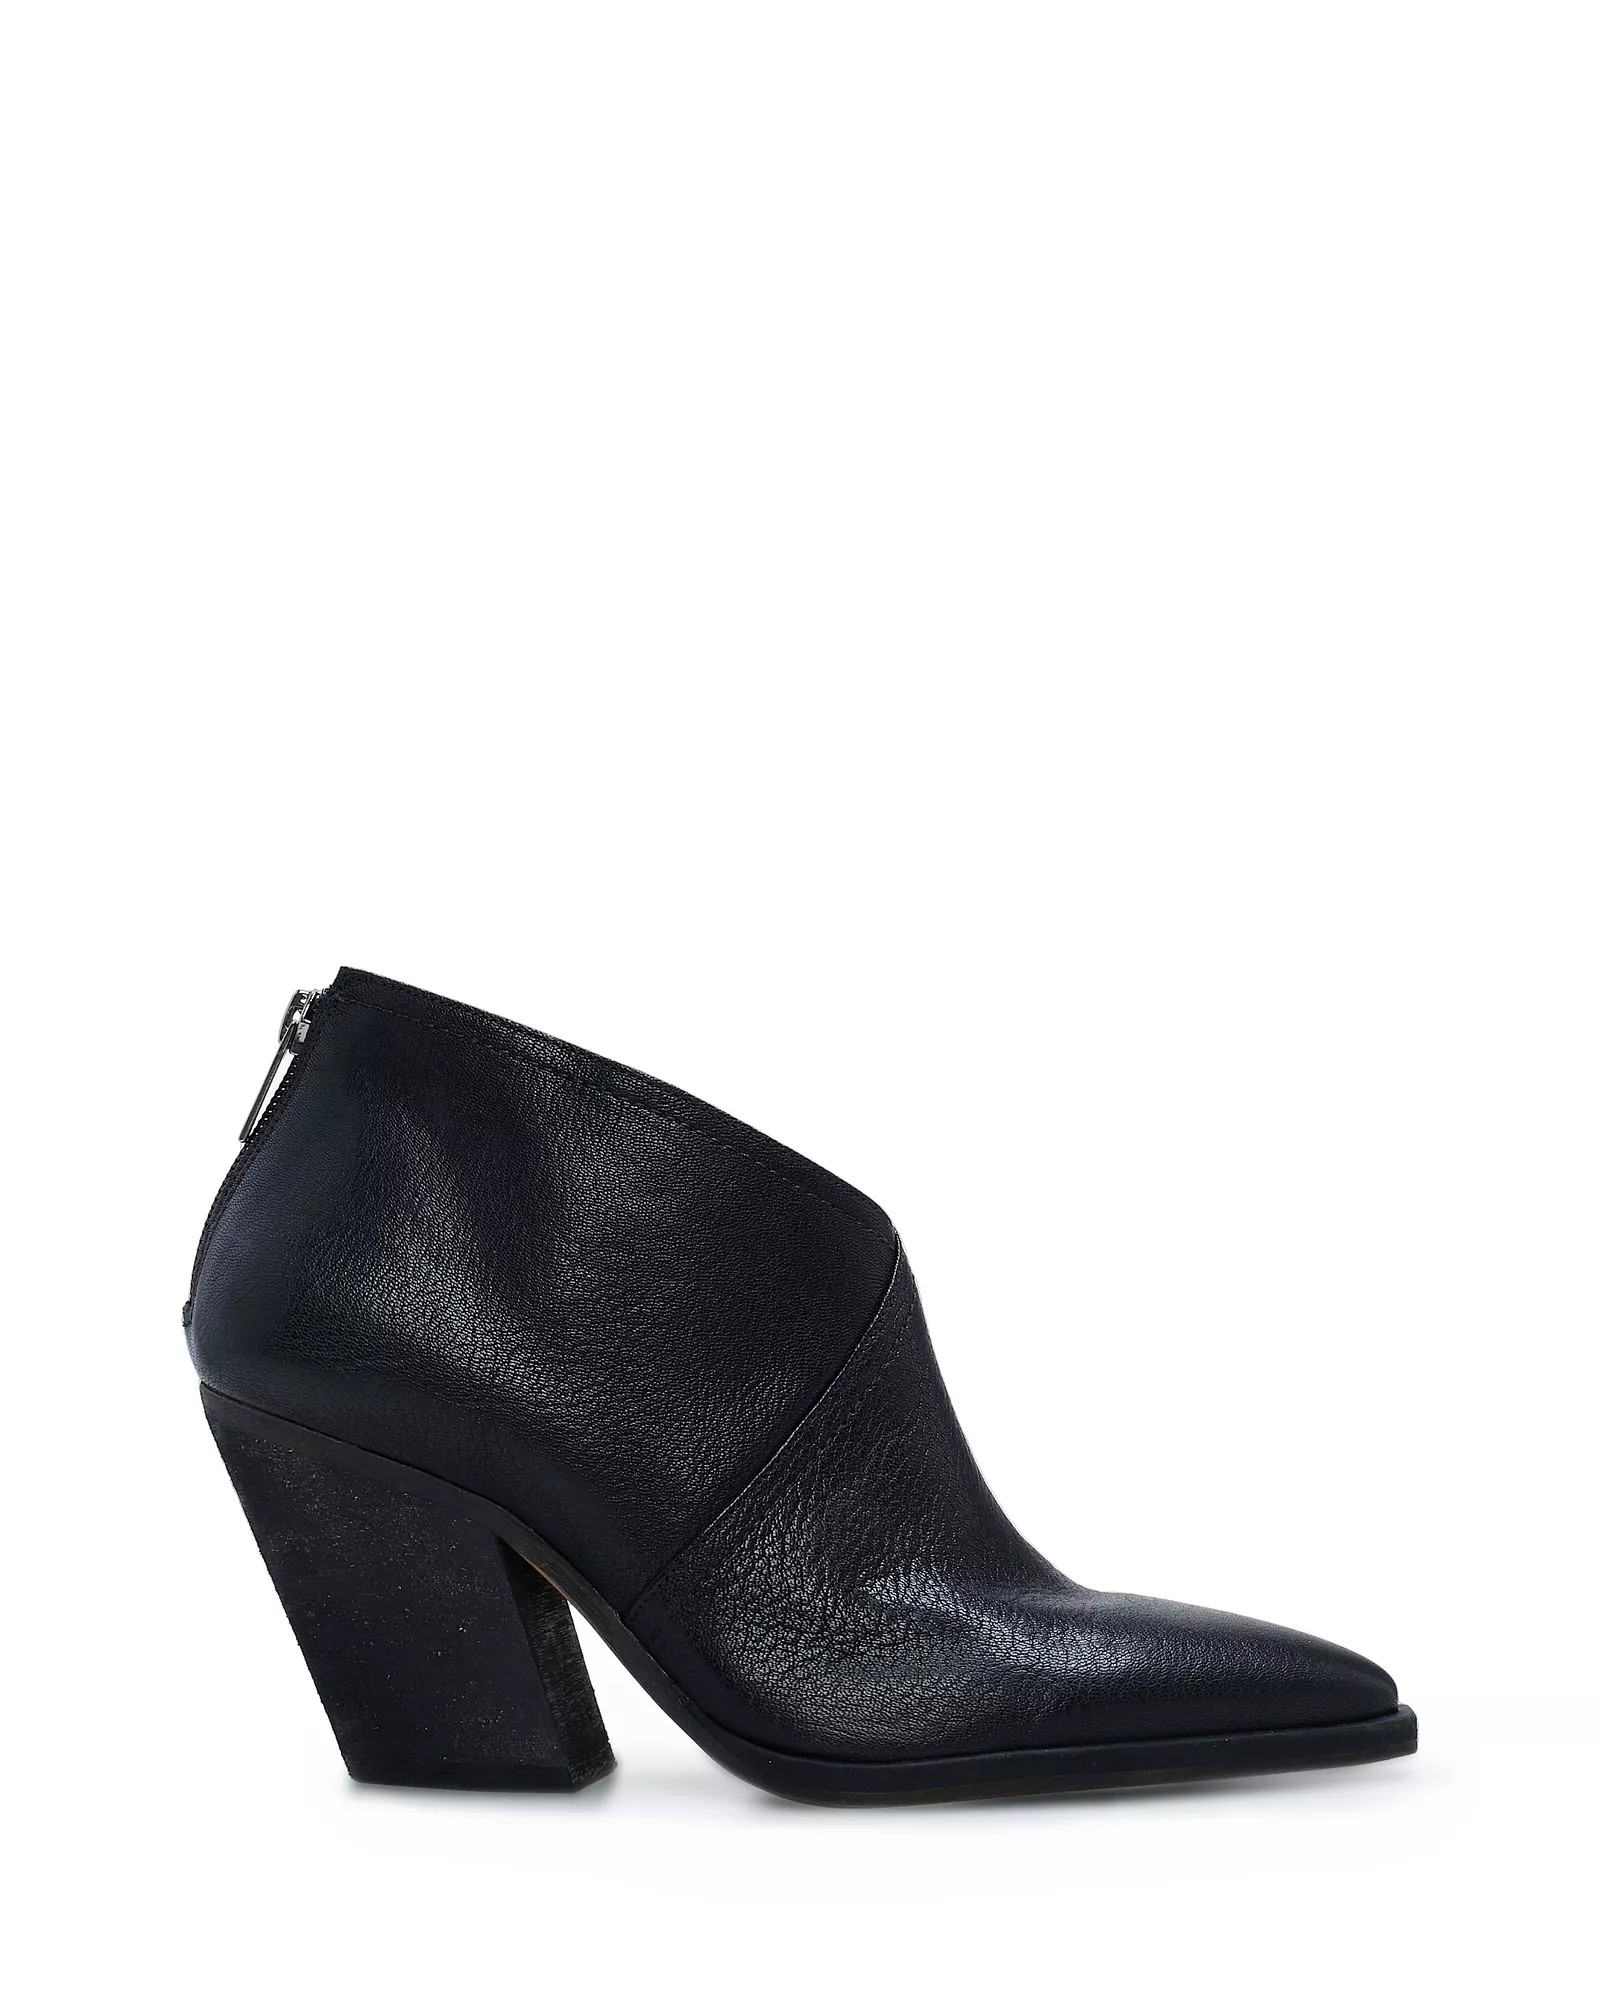 Vince Camuto Grishell Bootie